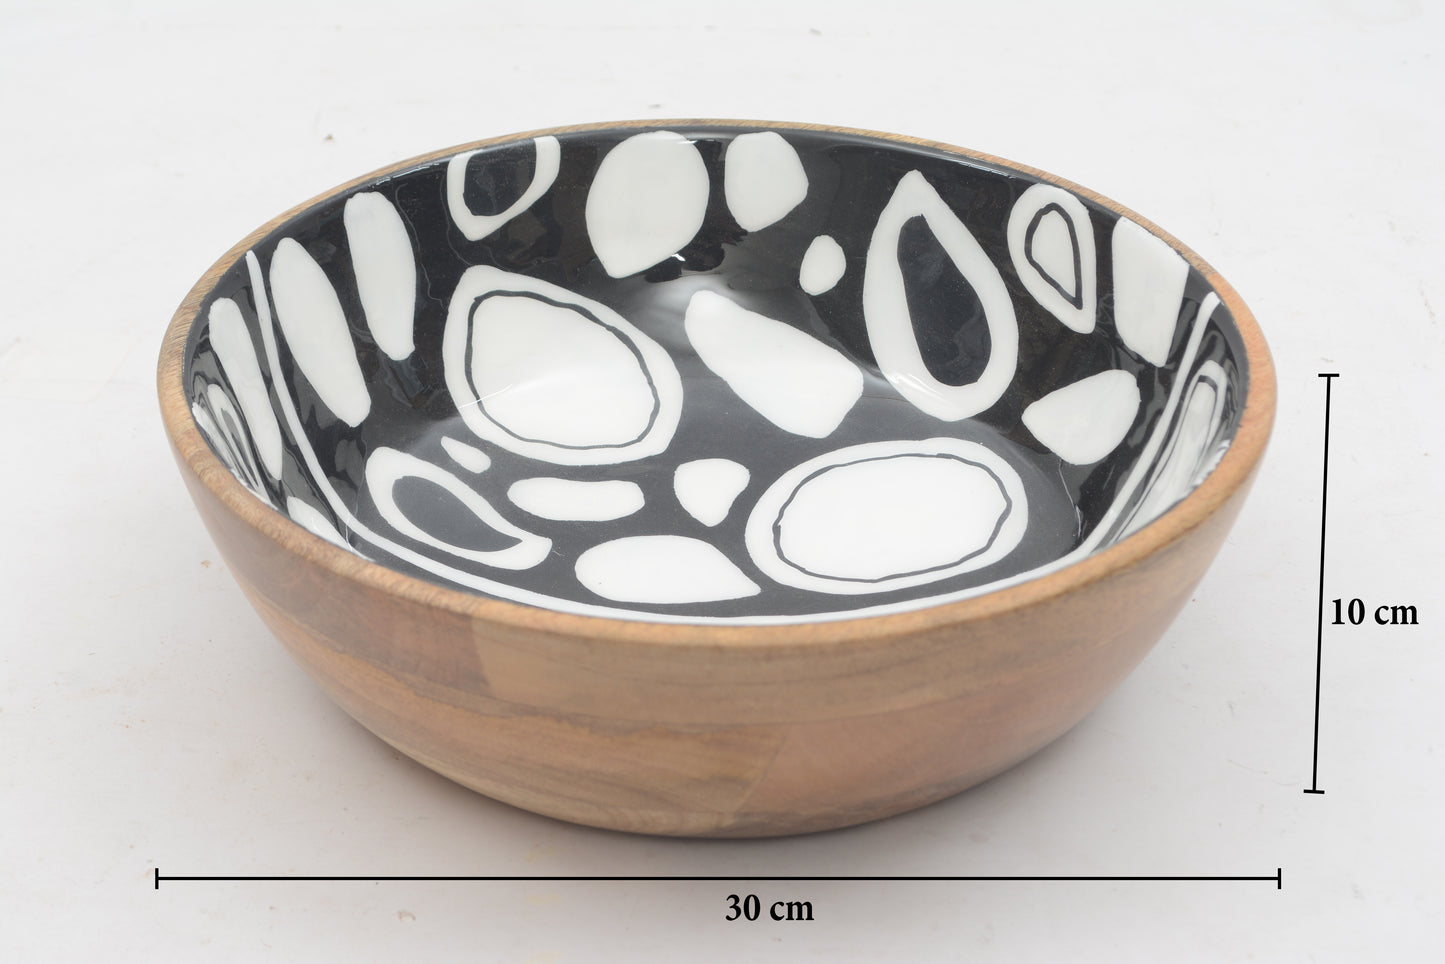 Handcrafted Large Monochrome Salad Bowl With Enamel